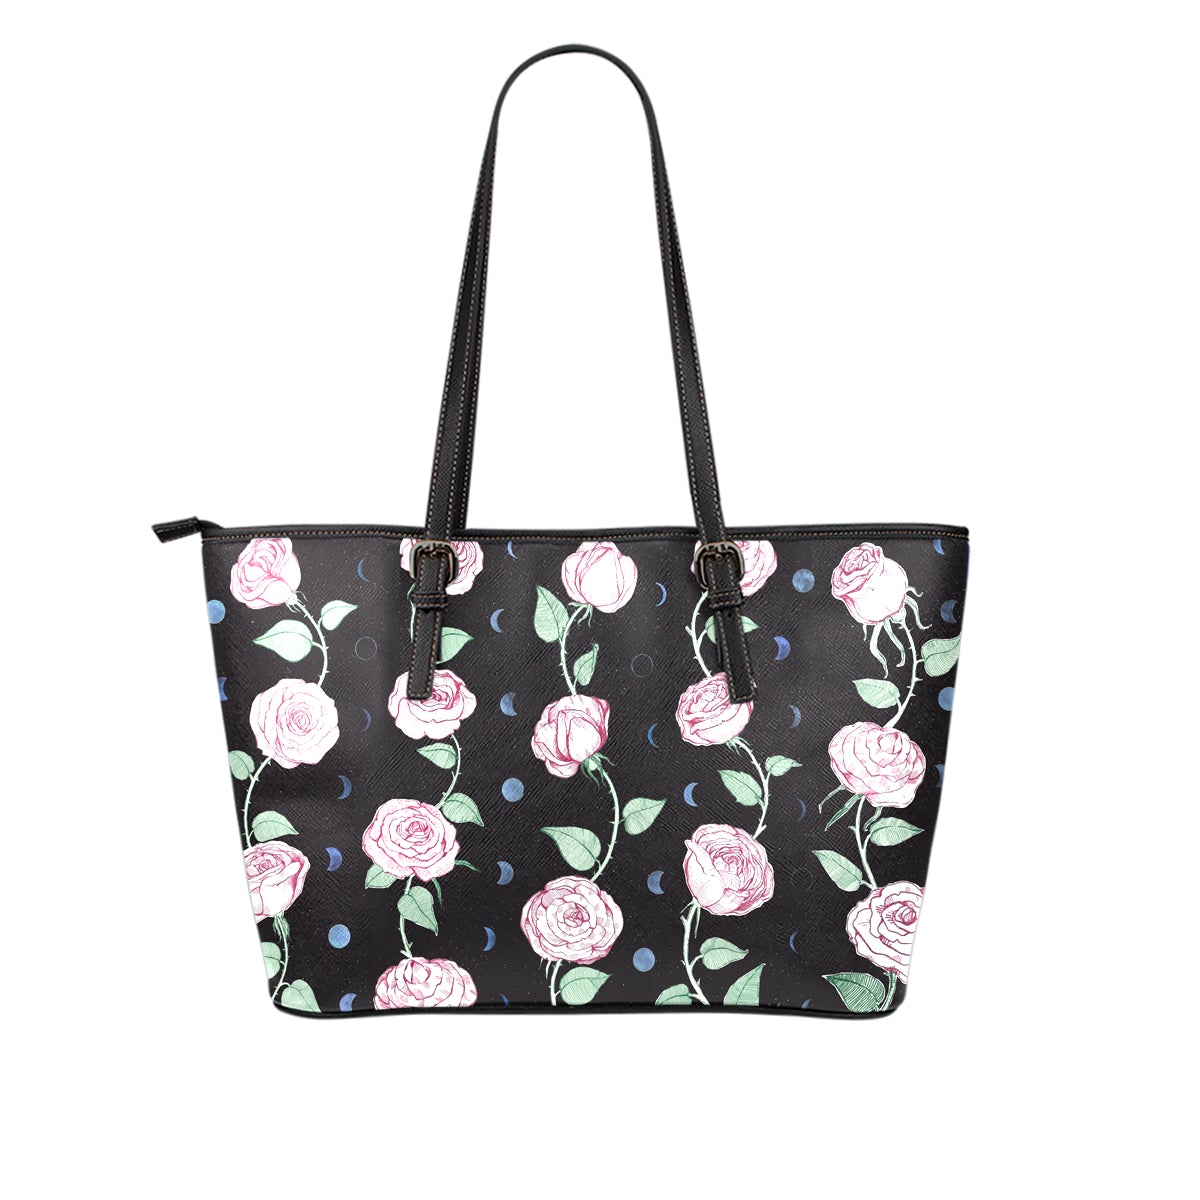 Roses & Moons - Big artificial leather bag.